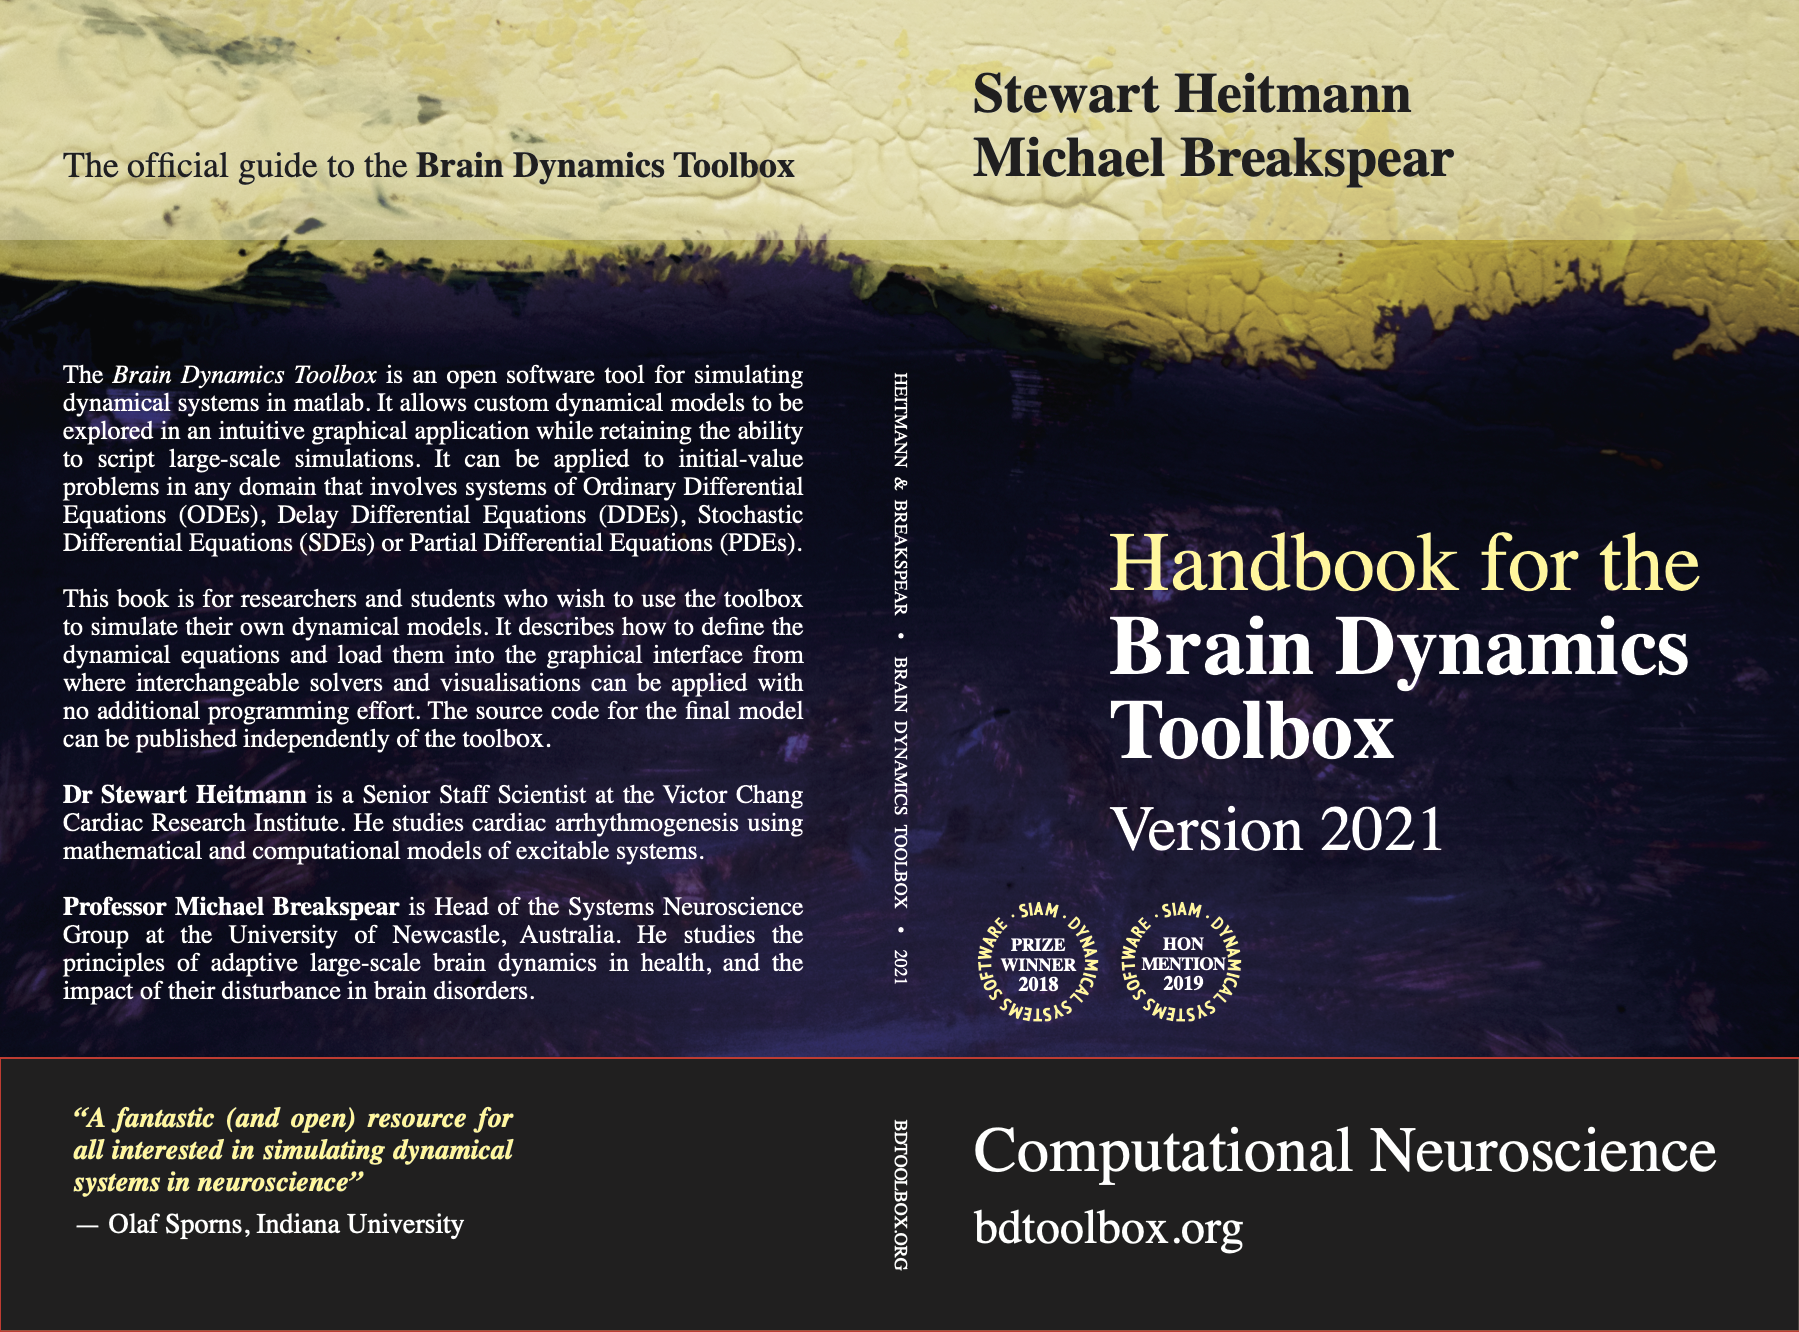 Handbook for the Brain Dynamics Toolbox BookCover 